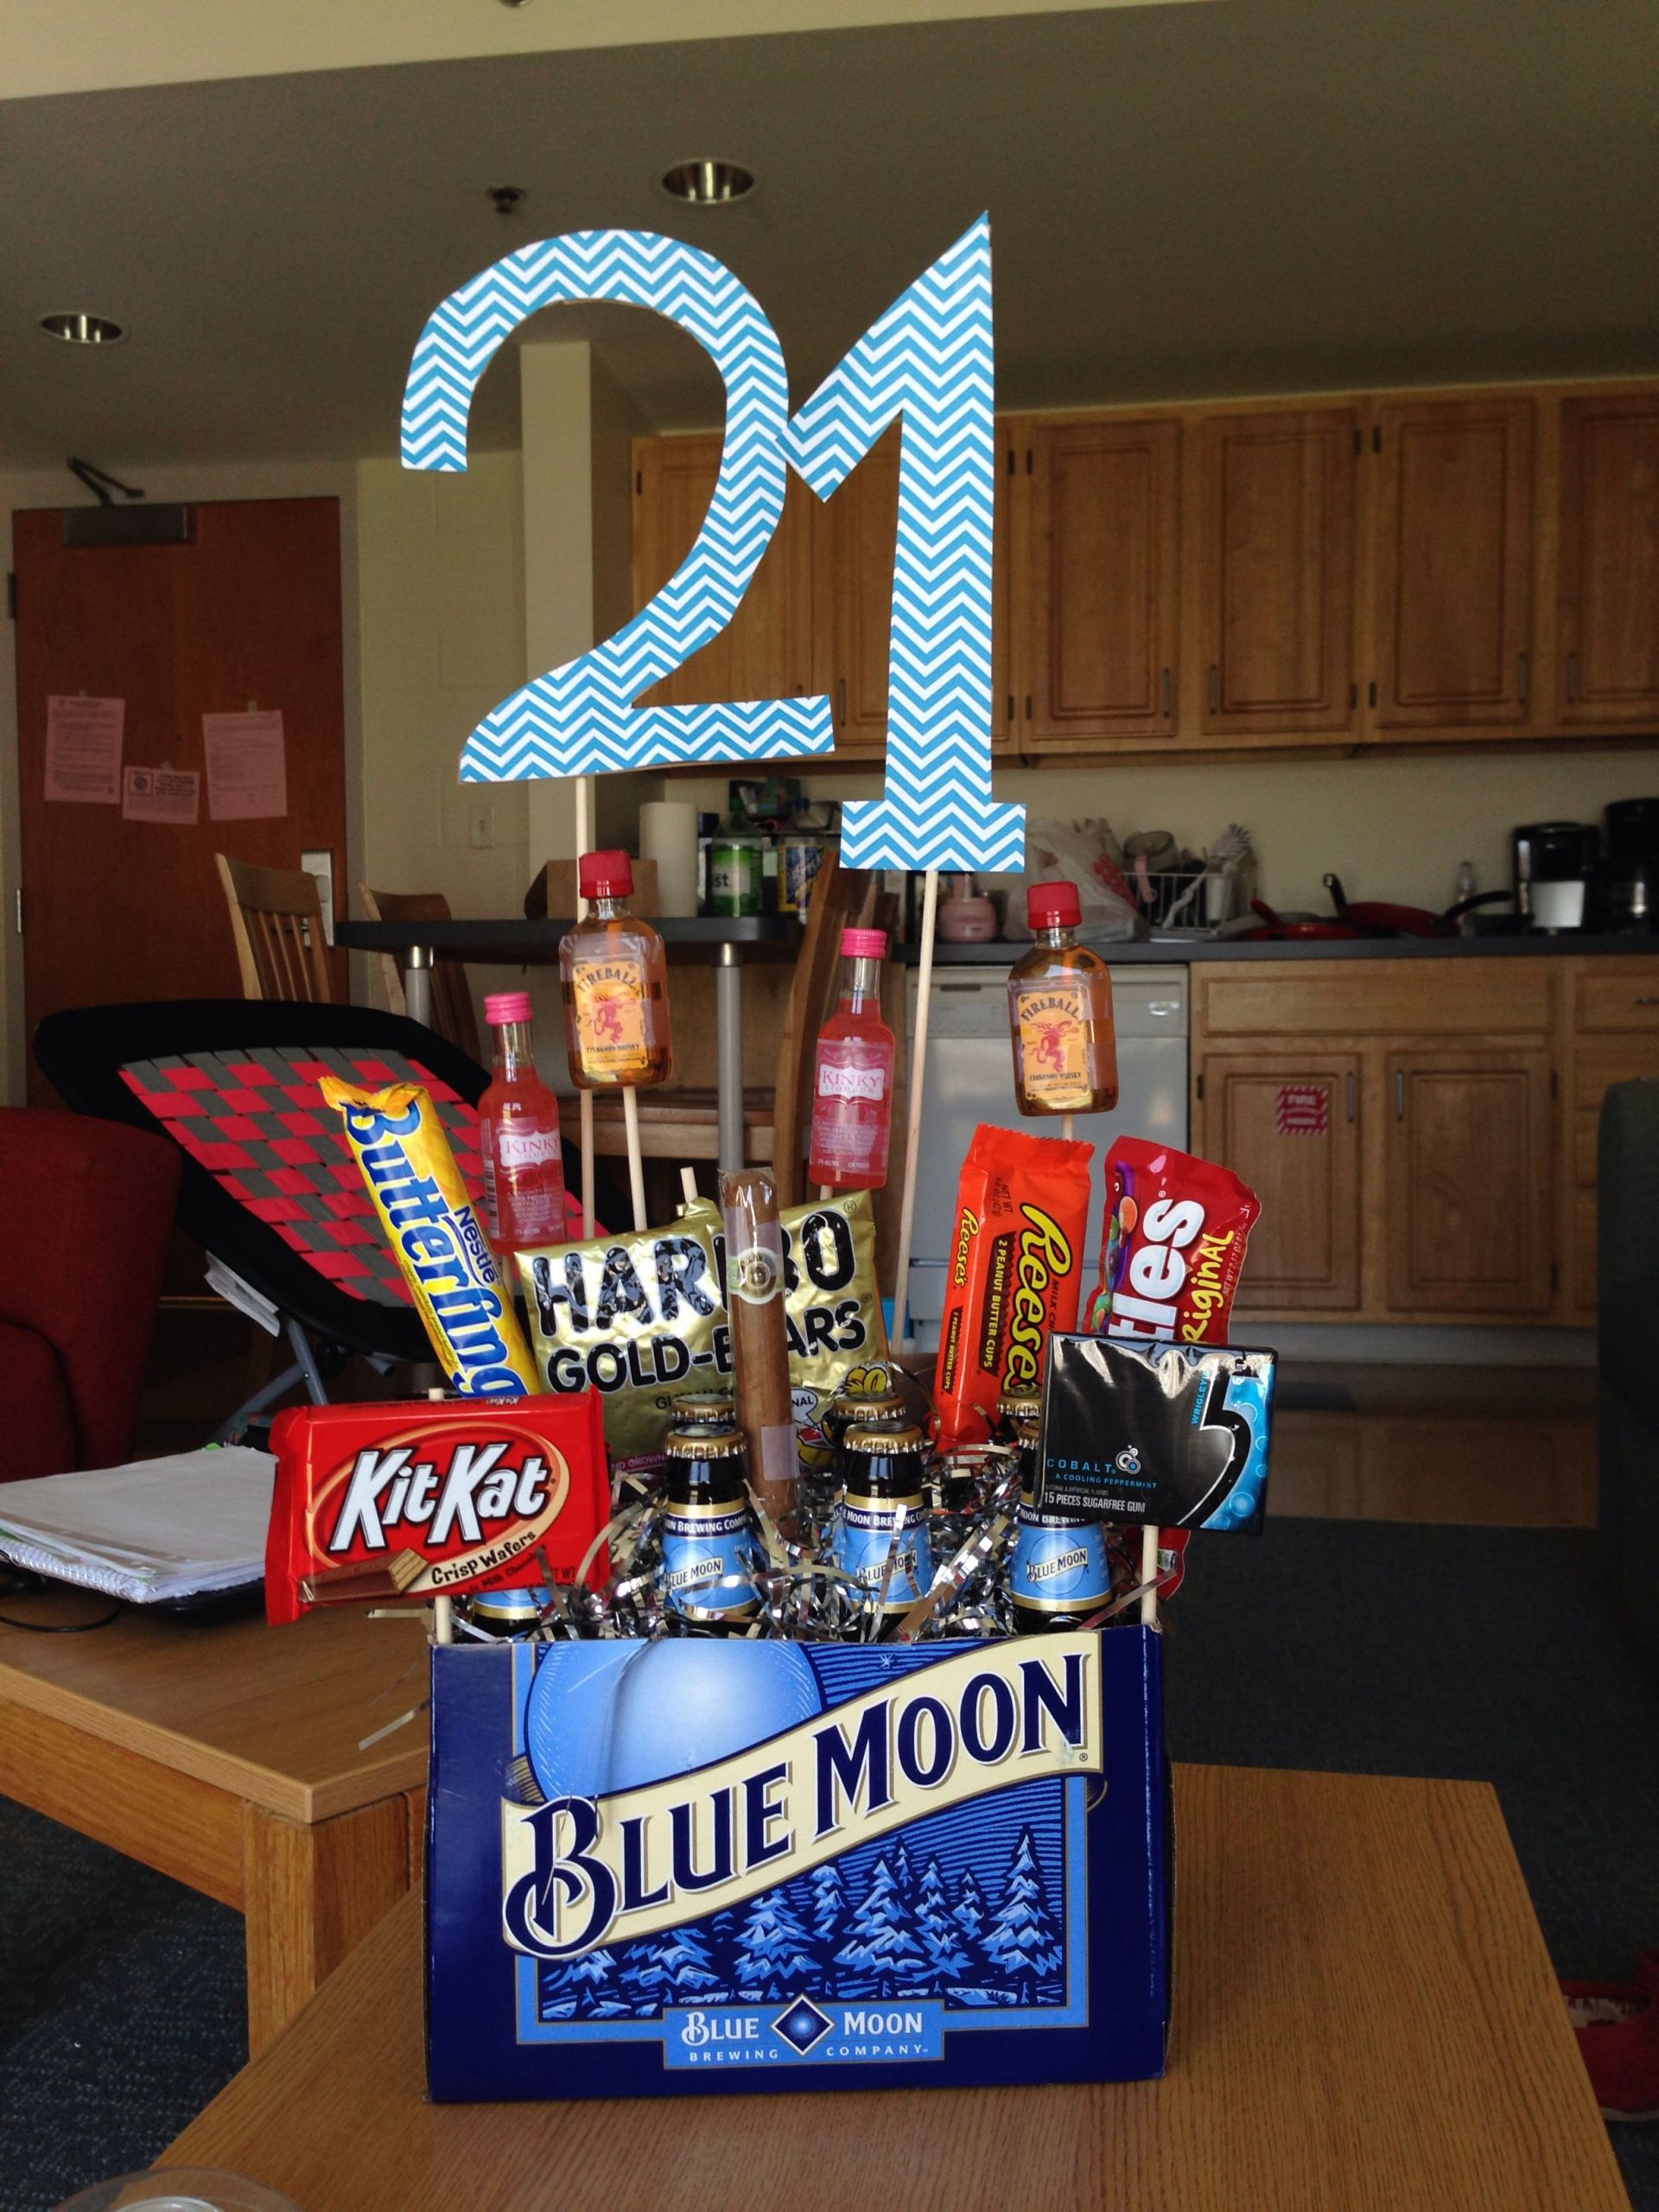 21st Birthday Gift Ideas For Boyfriend
 Can t believe hes 21 this year love this idea as